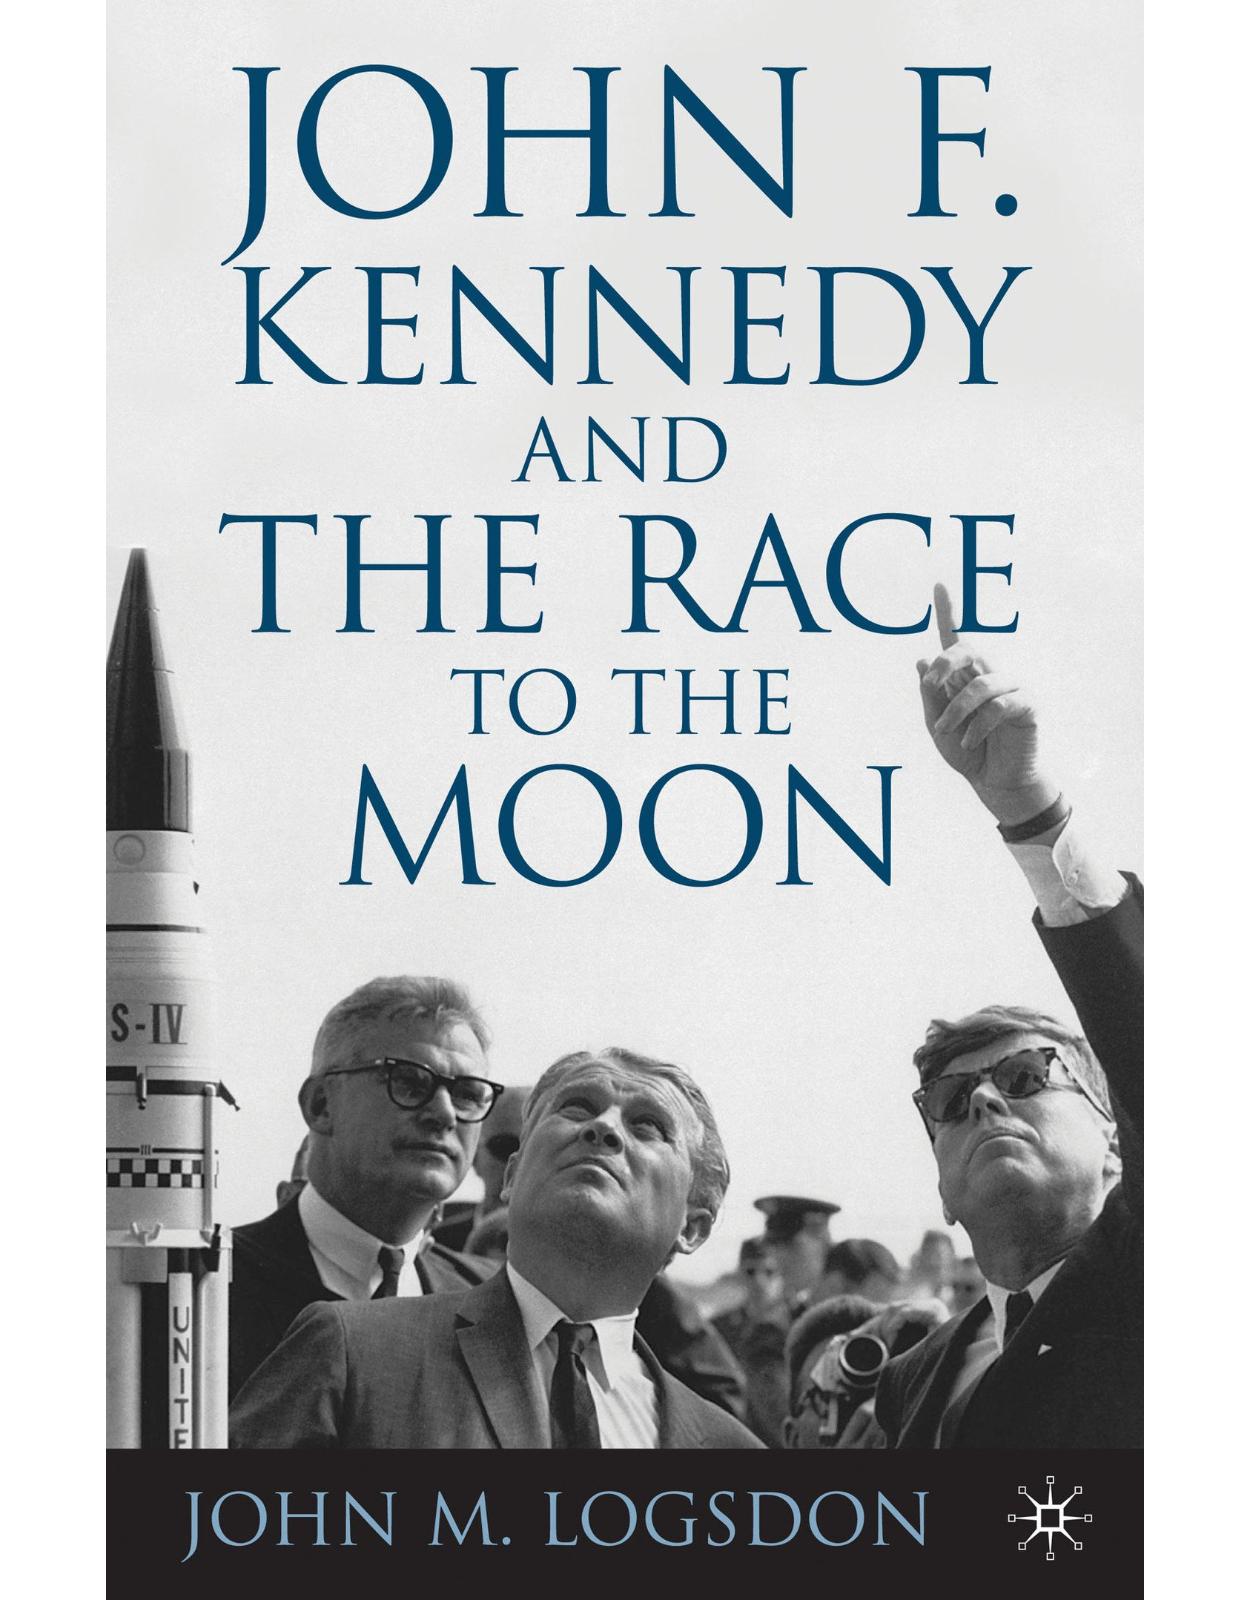 John F. Kennedy and the Race to the Moon (Palgrave Studies in the History of Science and Technology)